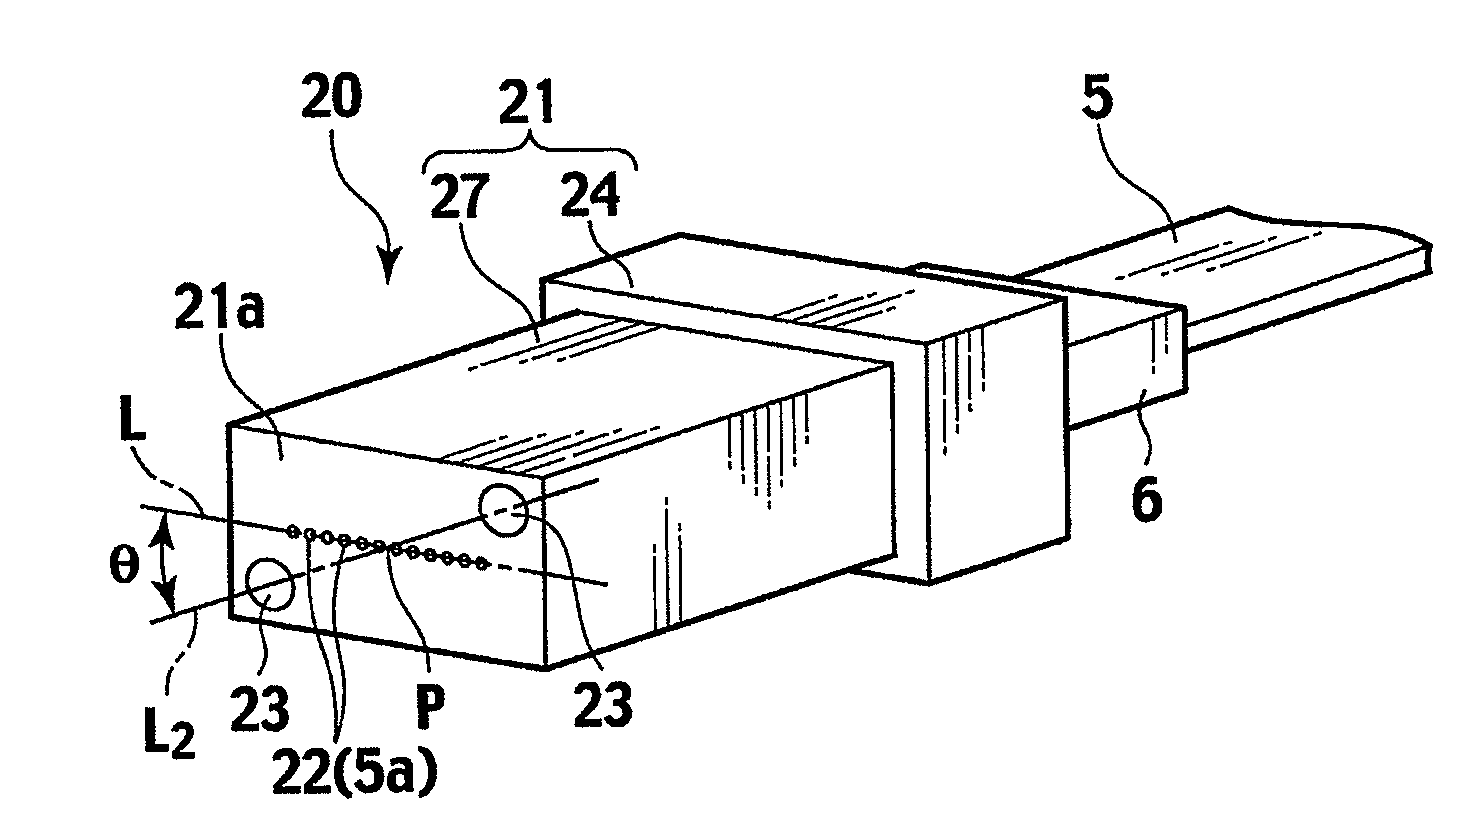 Optical connector having a fitting protrusion or fitting recess used for positioning